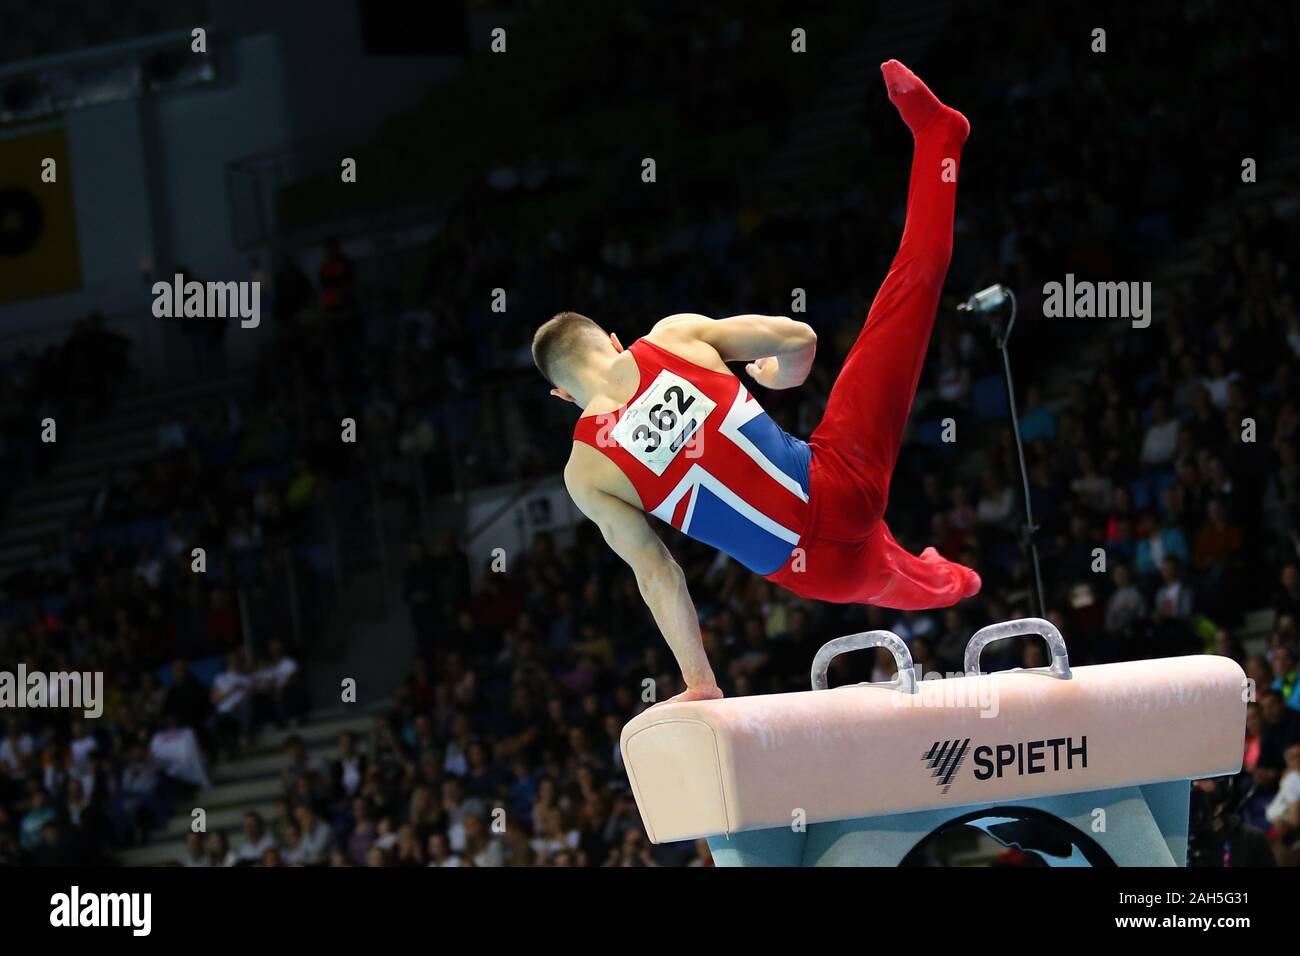 Szczecin, Poland, April 13, 2019: British athlete Max Whitlock competes on the pommel horse during the artistic gymnastics championships Stock Photo